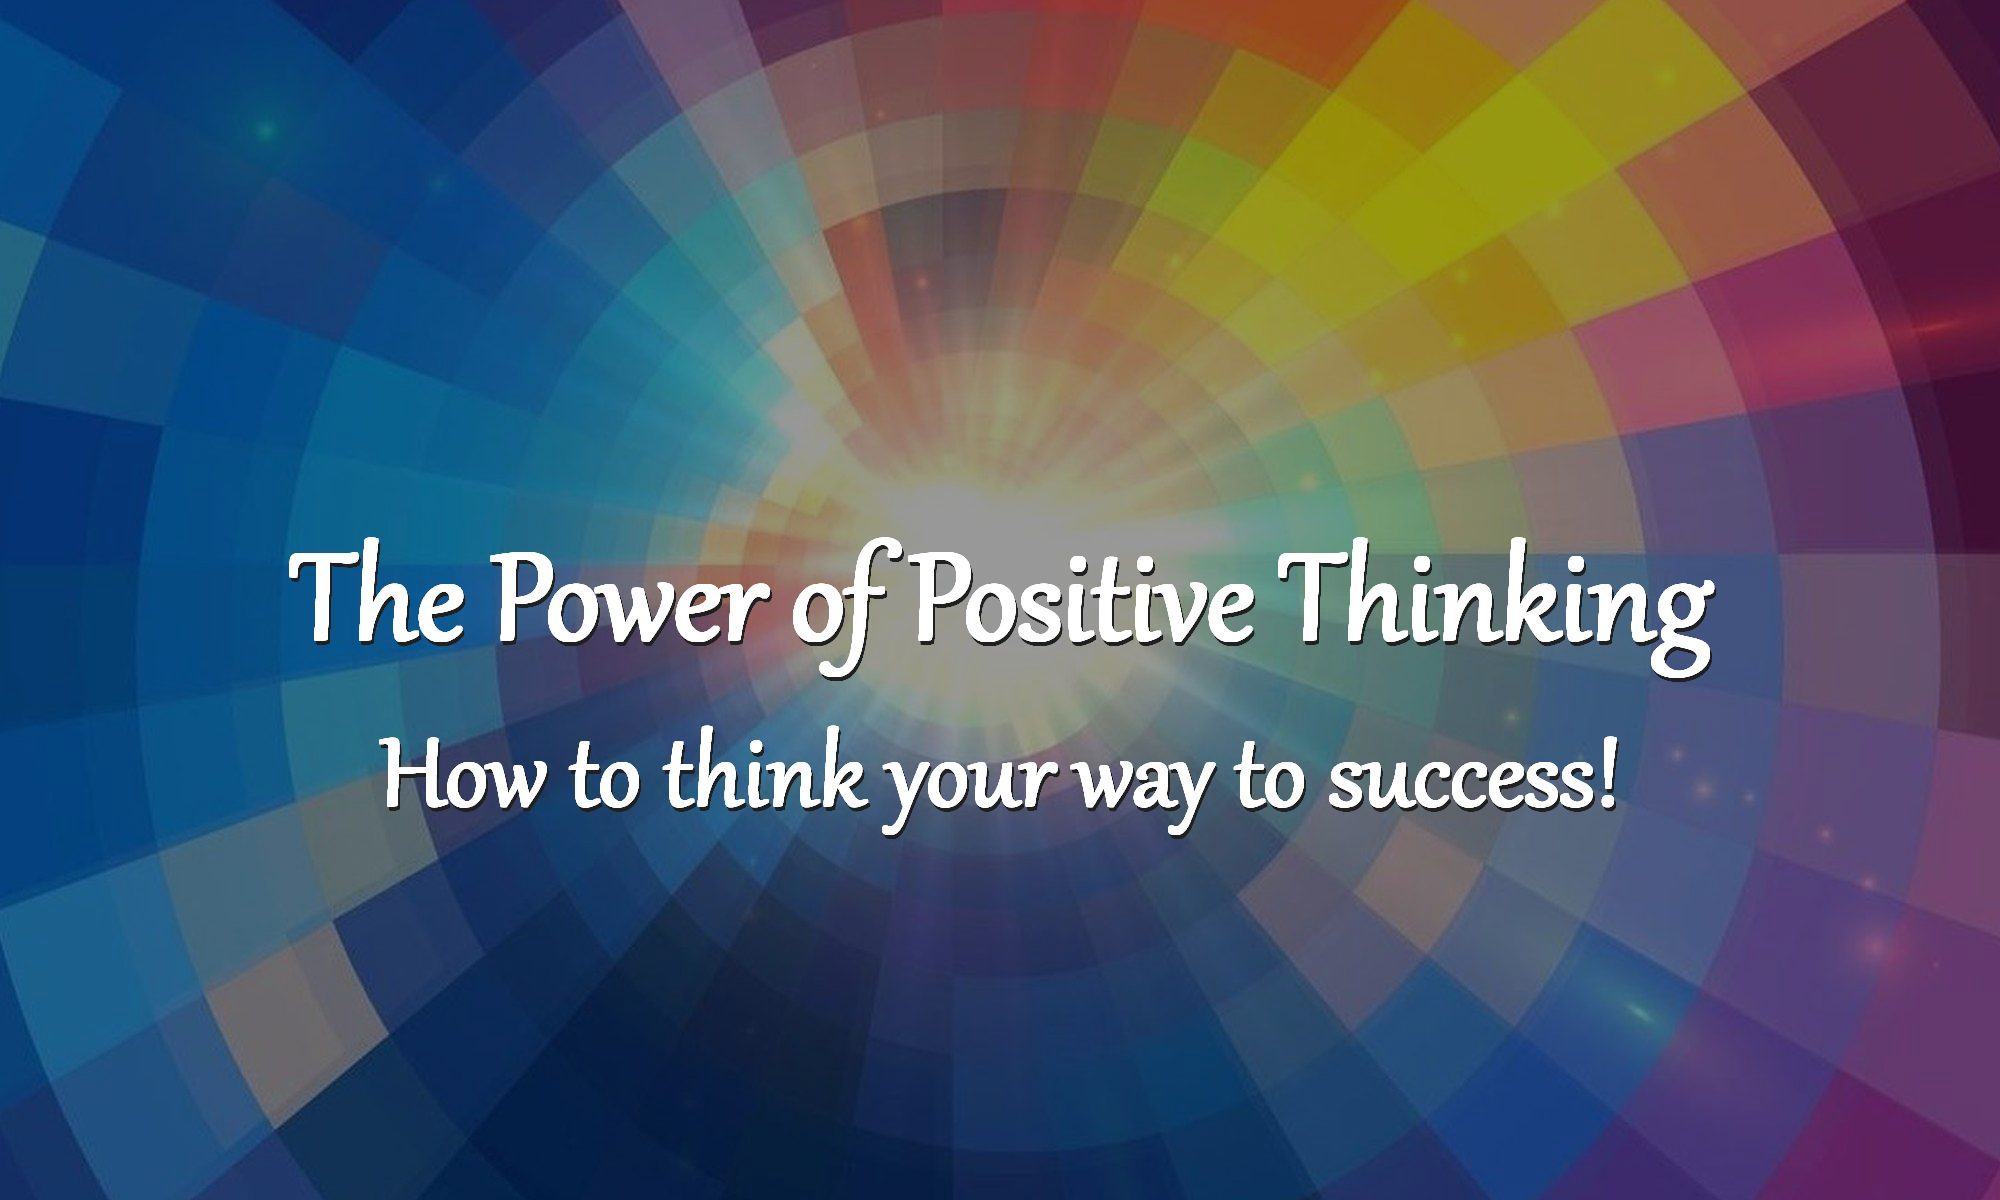 The Power of Positive Thinking: How to Think Your Way to Success